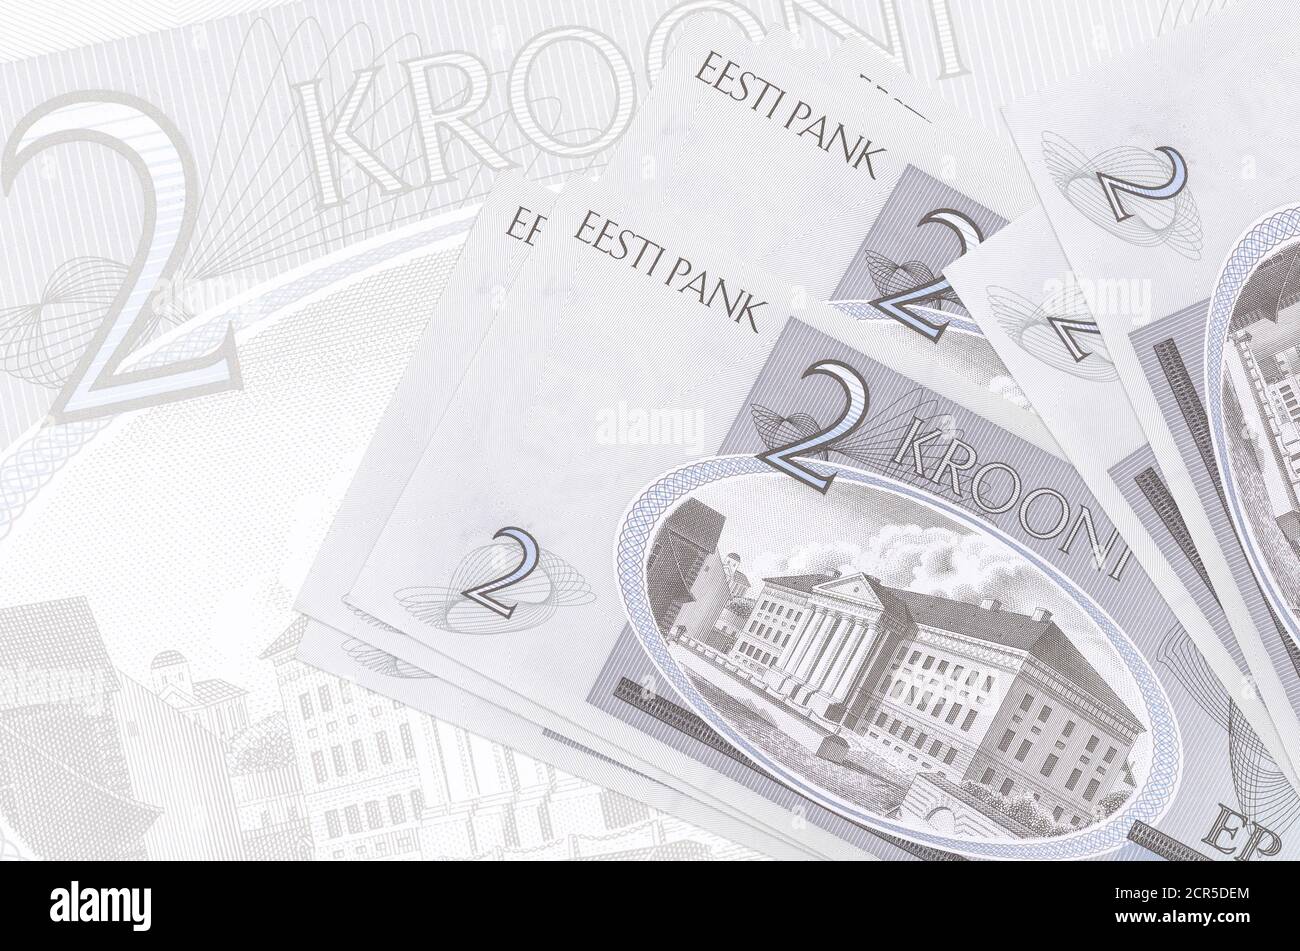 2 Estonian kroon bills lies in stack on background of big semi-transparent banknote. Abstract presentation of national currency. Business concept Stock Photo